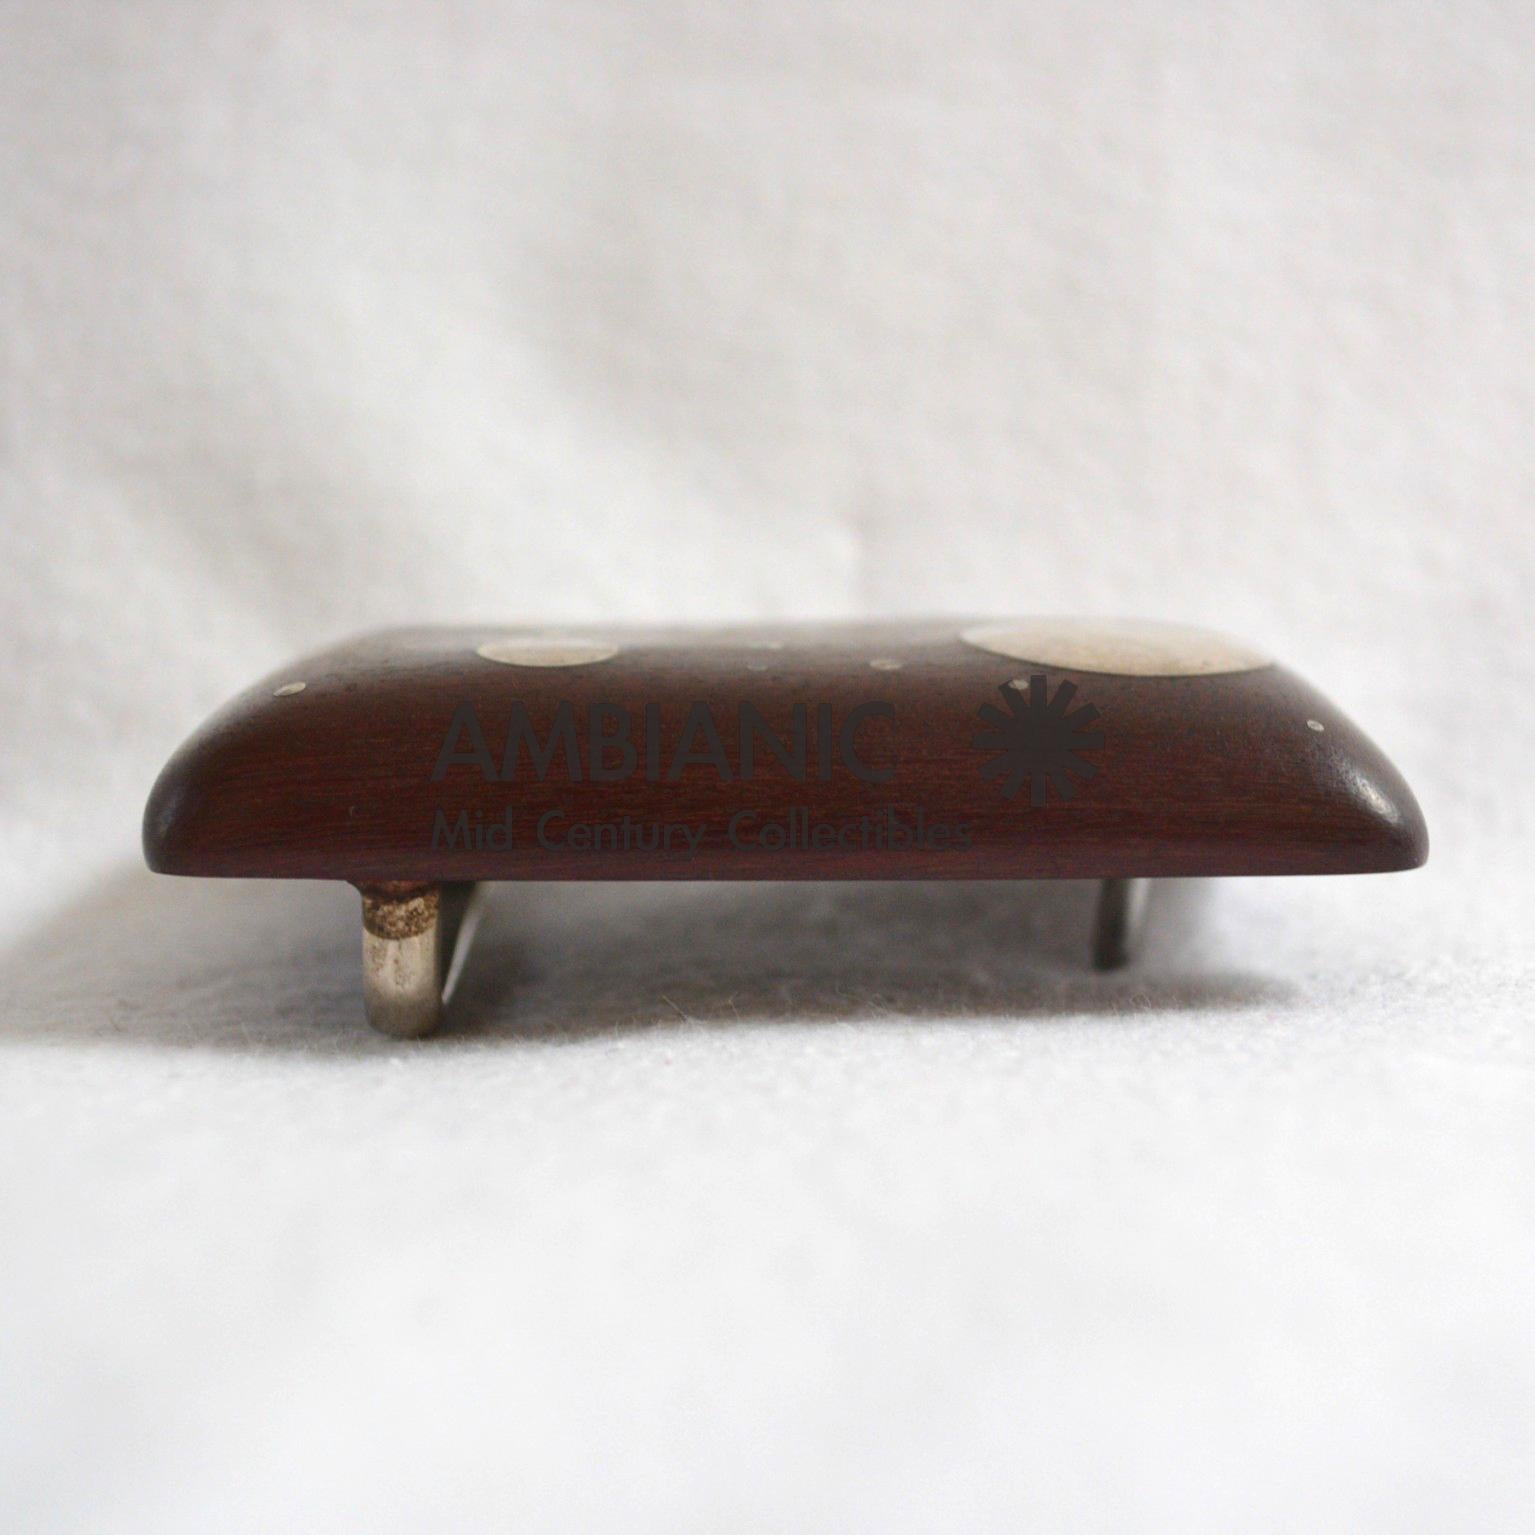 Mid-Century Modern William Spratling Modernist Belt Buckle Sterling Silver in Mahogany Mexico 1960s